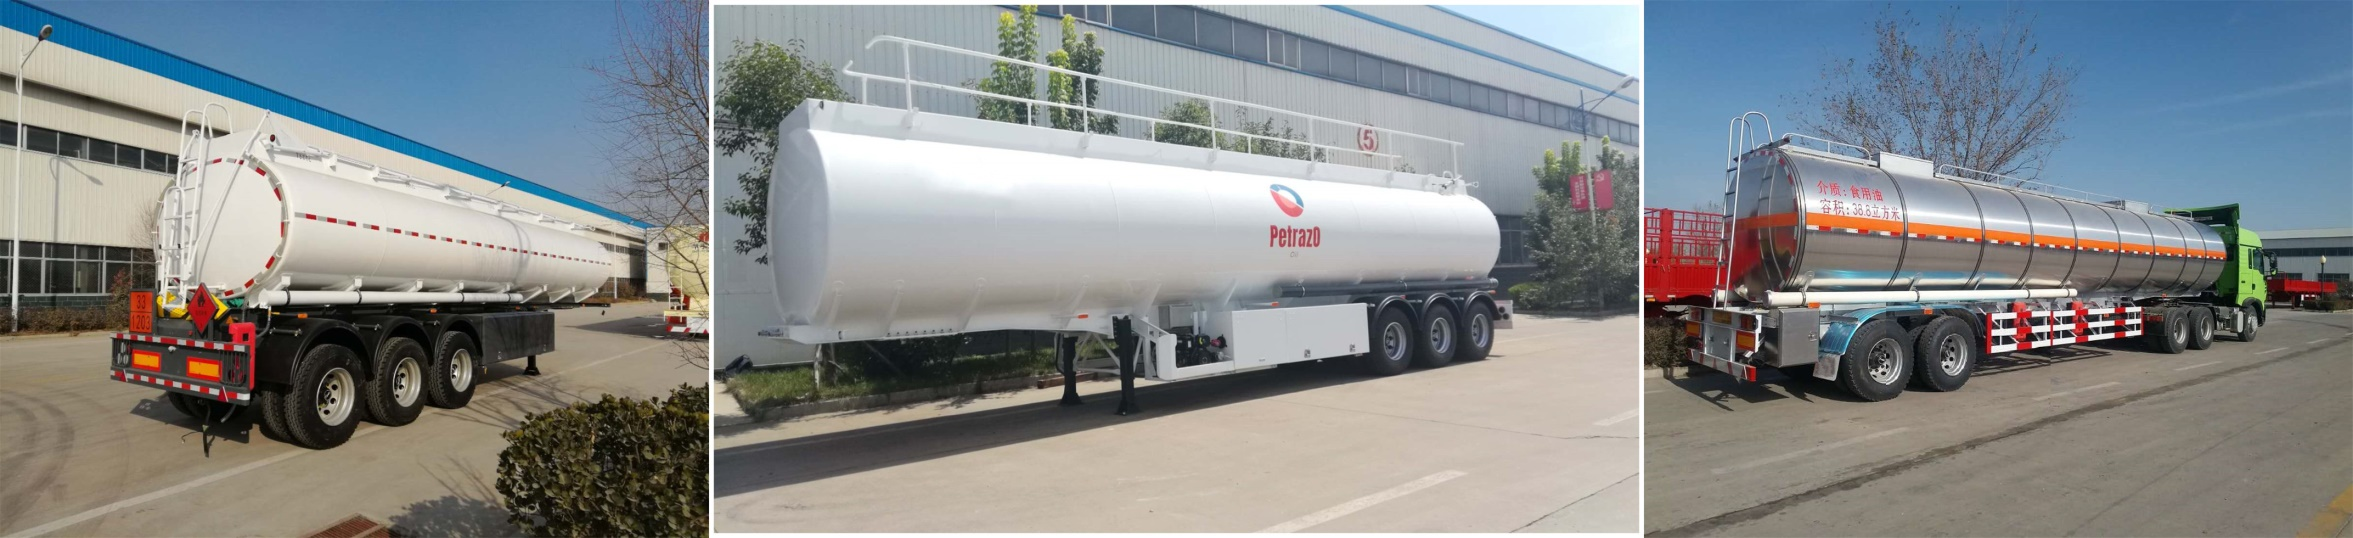 https://www.qingtetrailers.com/carbon-stainless-oil-tank-semitrailer-product/